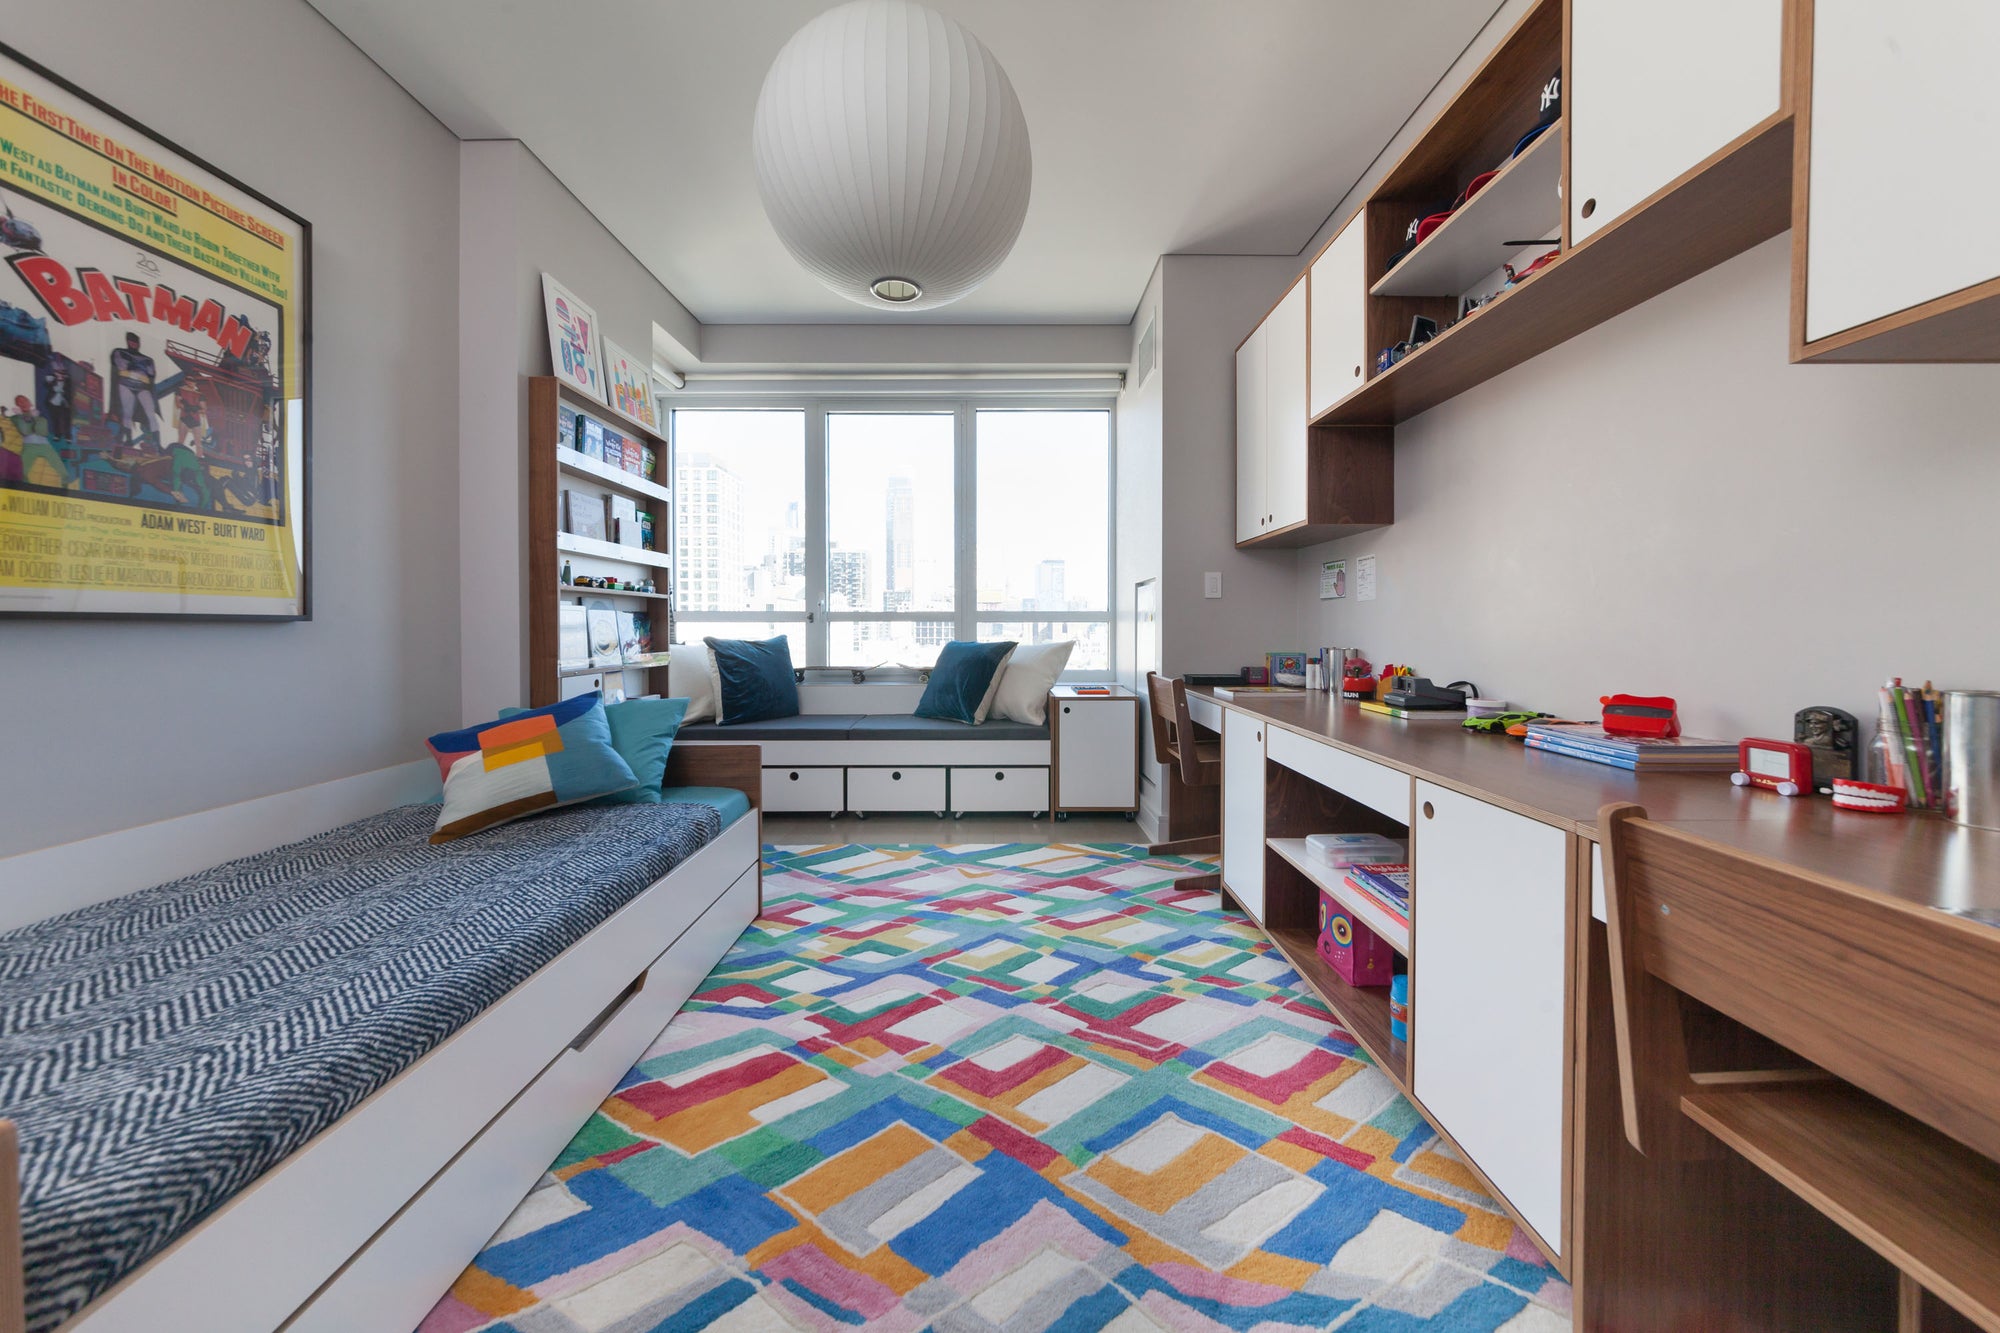 Bright child's room with bed, study desk, colorful rug, and window seating area.